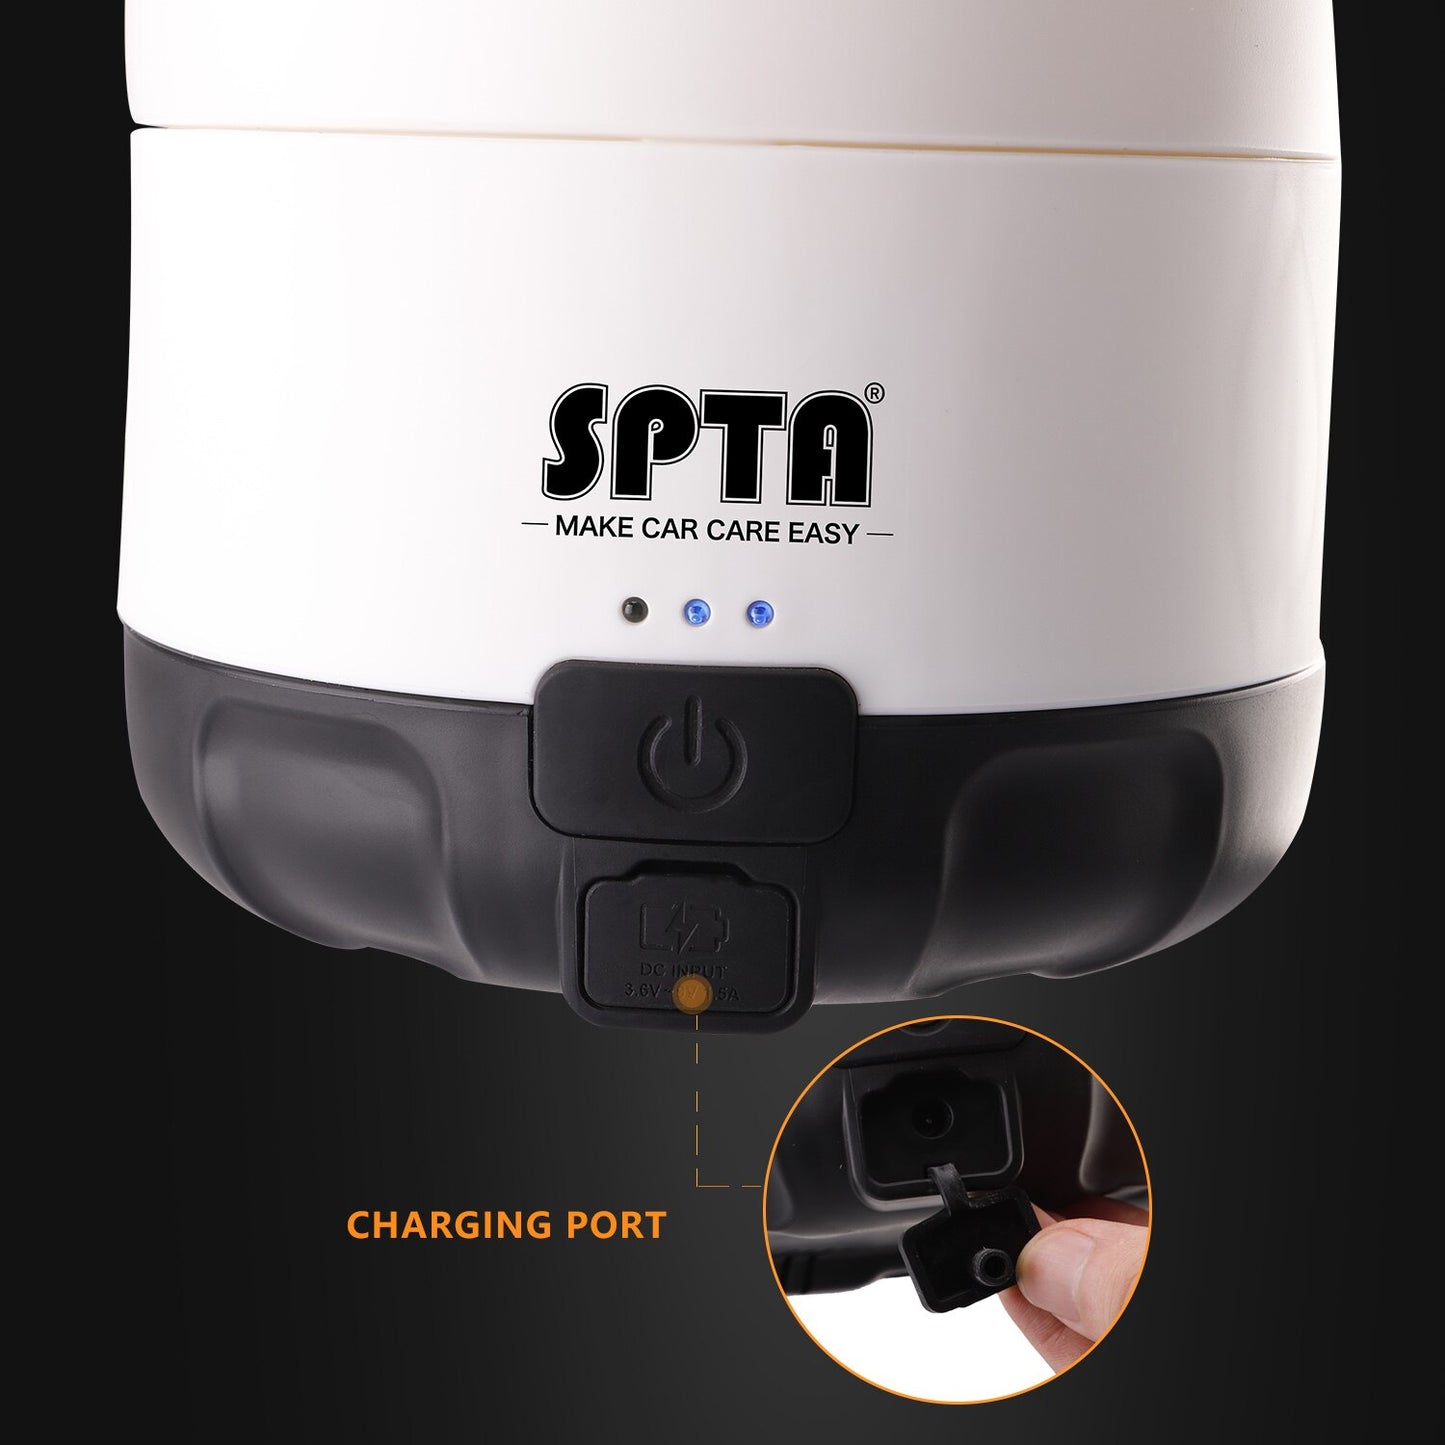 SPTA 1.8L Cordless Charging Car Sprayer - Foam Pressure Pot for Home & Vehicle Cleaning